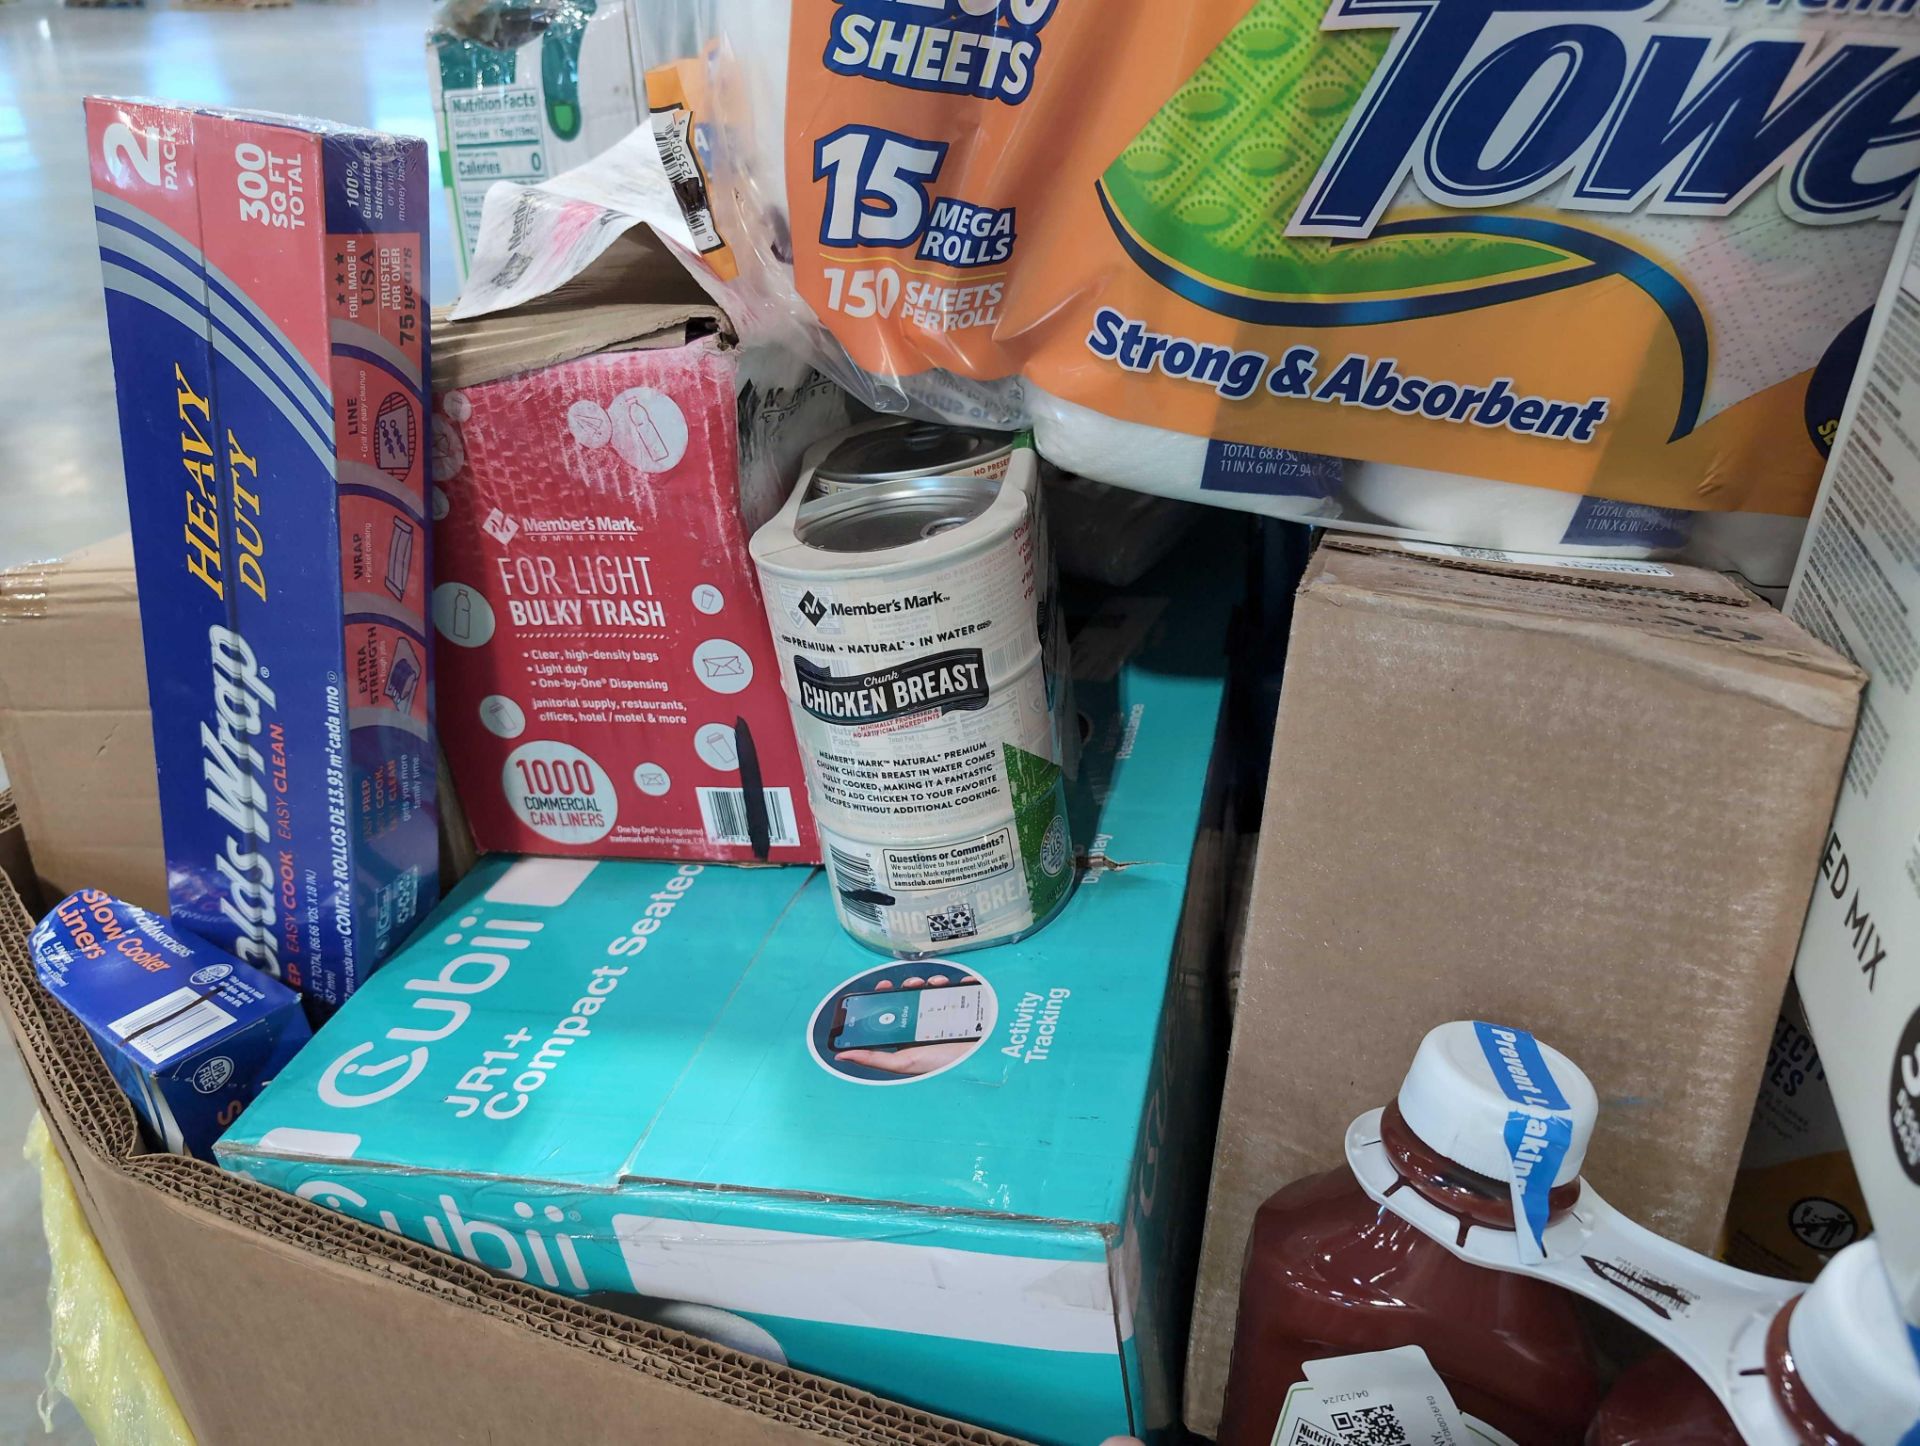 Big box store in a box: Canned chicke, Paper towels, baket chips, ketchup, trash liners, Cubii seate - Image 4 of 14